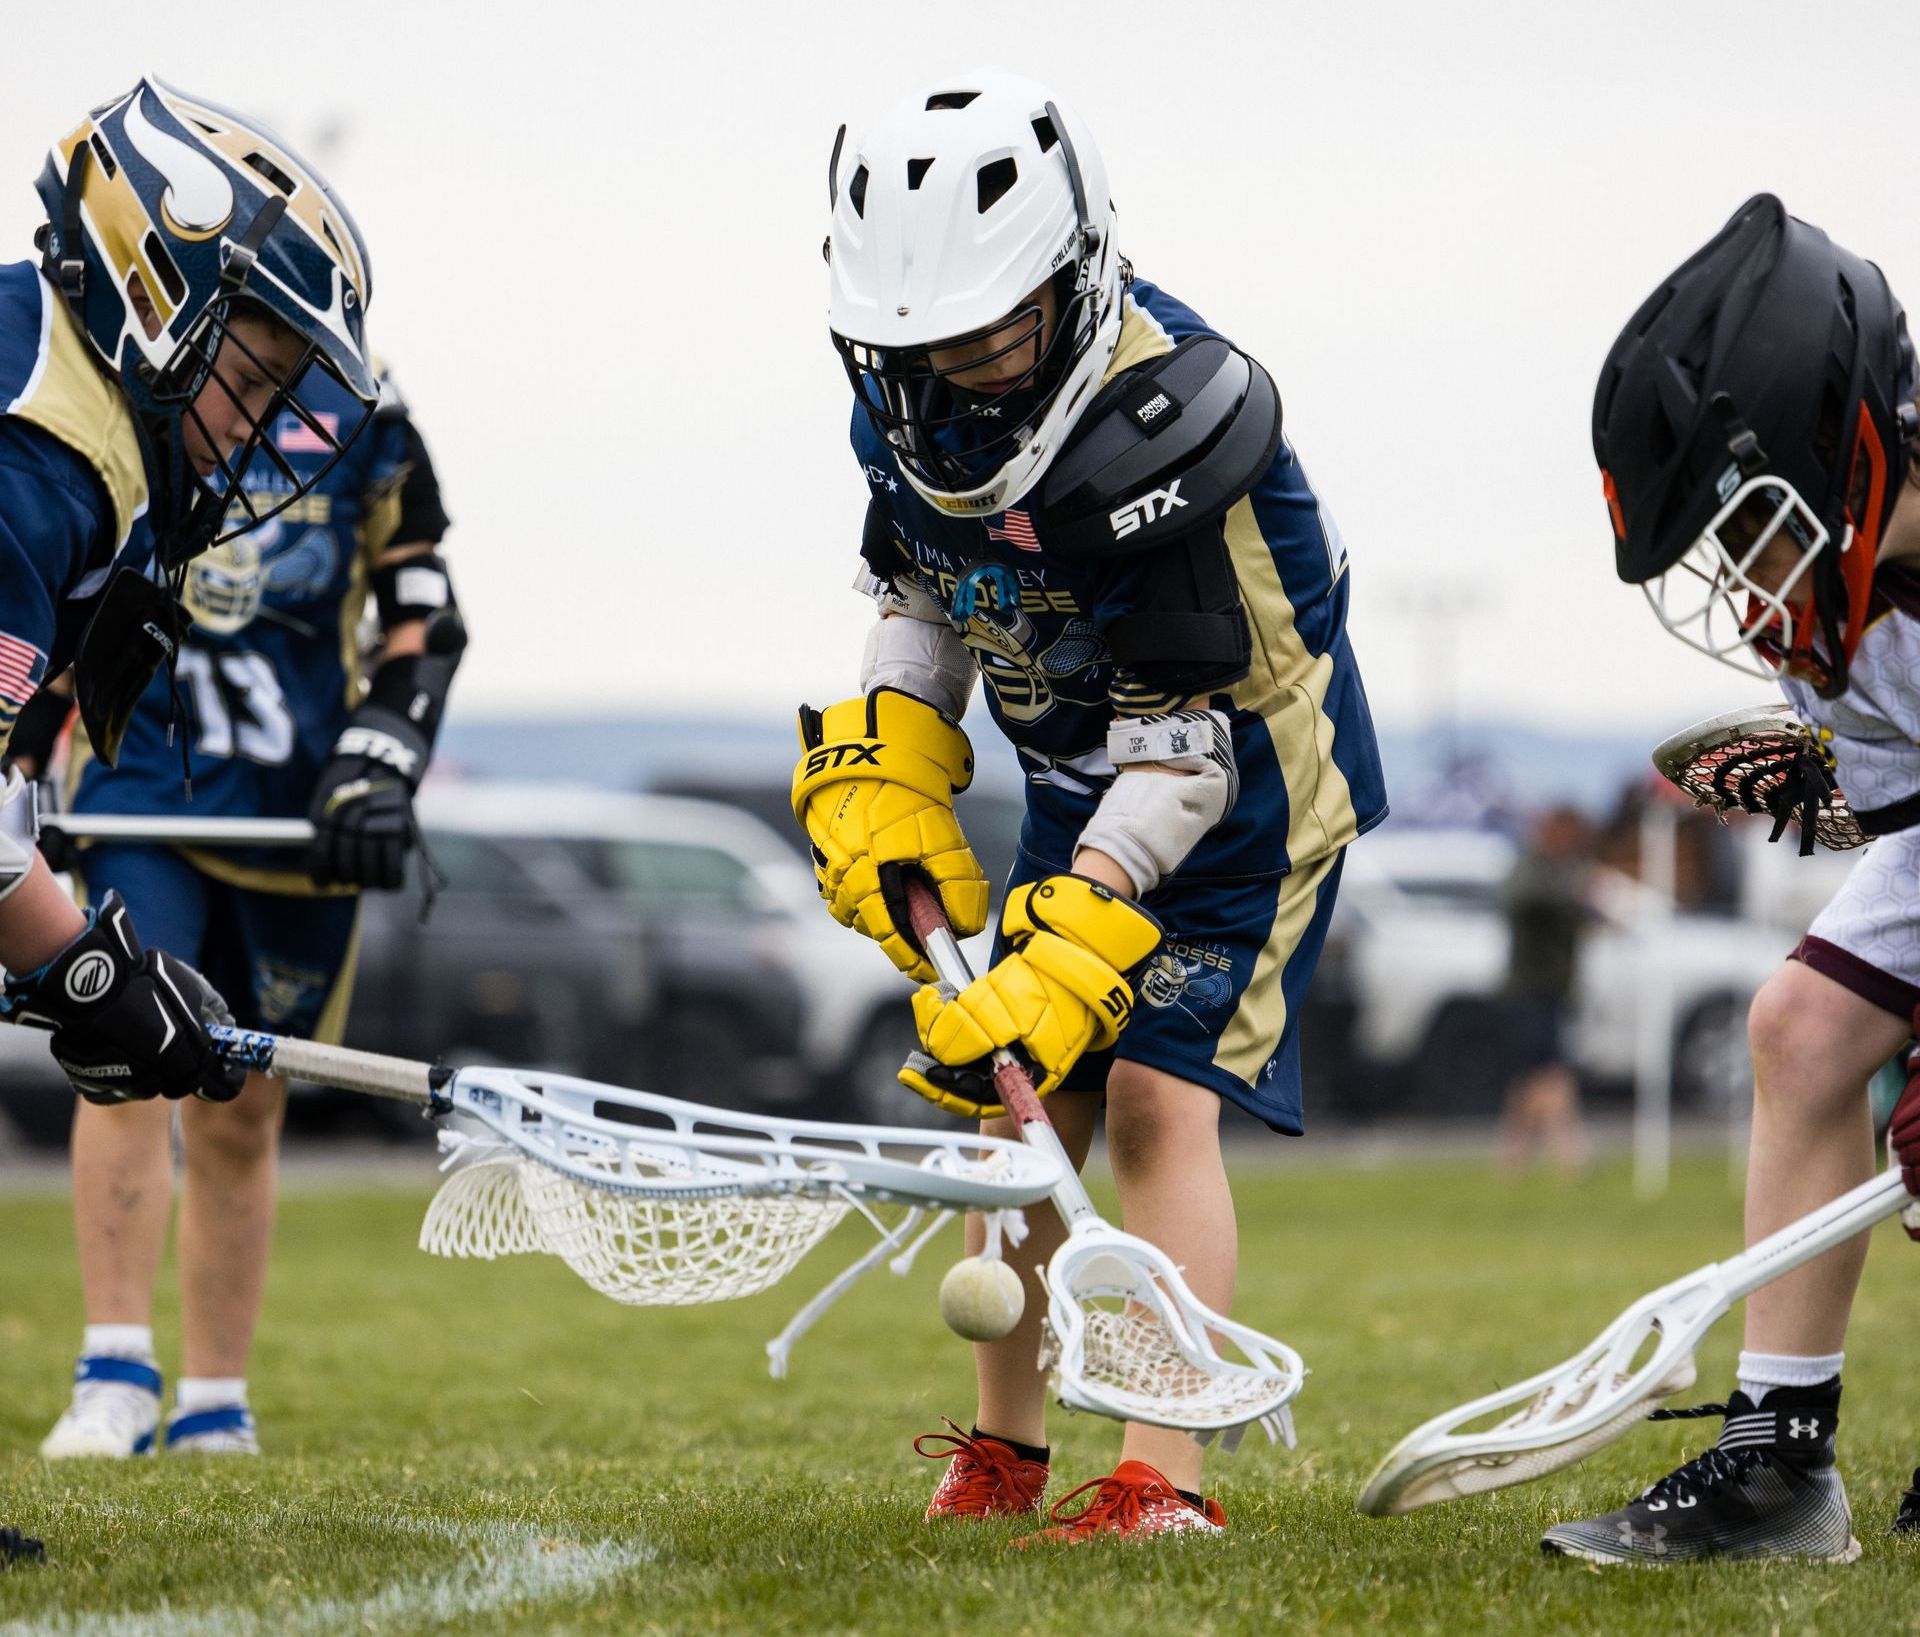 A group of young boys are playing lacrosse on a field.